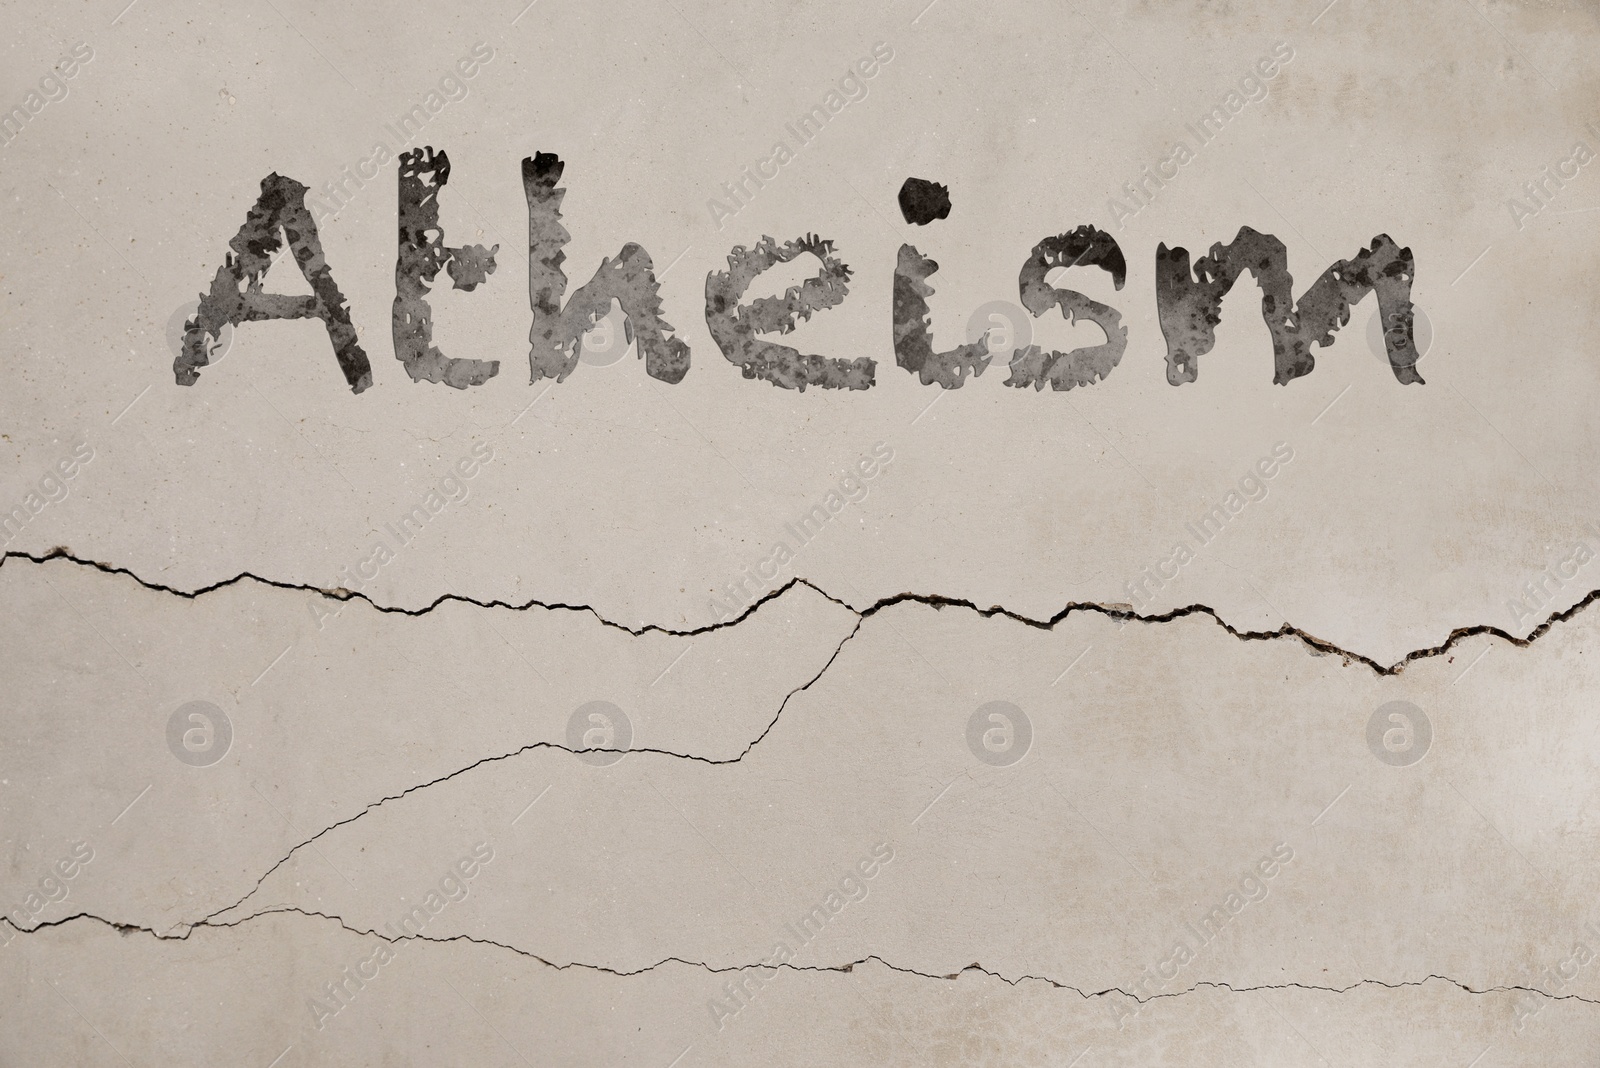 Image of Word Atheism on concrete surface, black ink style. Philosophical or religious position